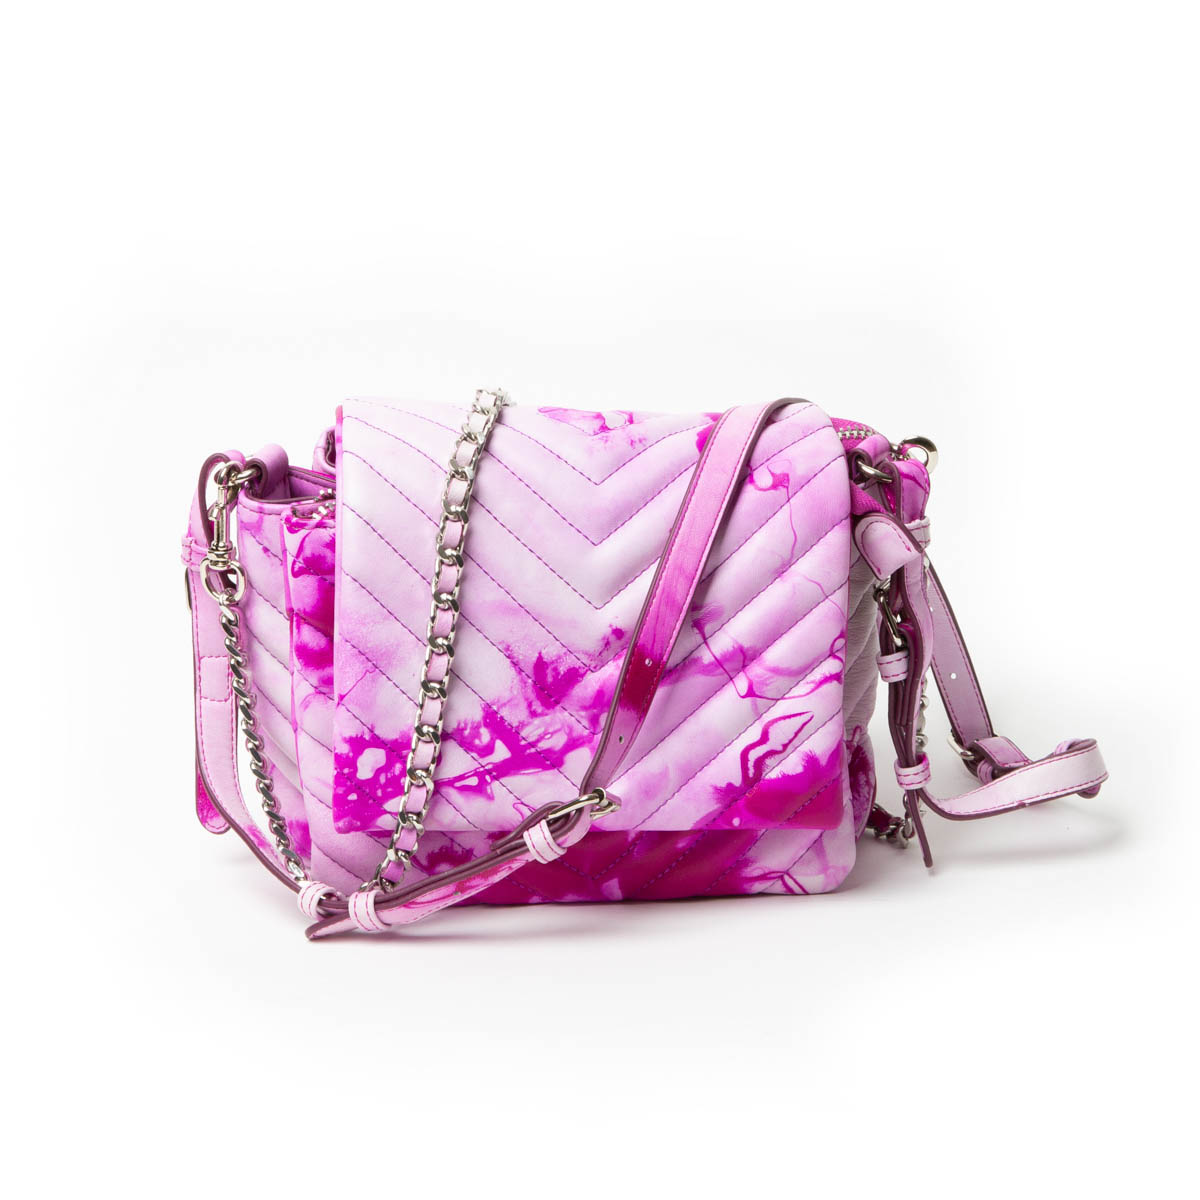 SAC ABY MATELASSE TIE AND DYE ORCHIDEE